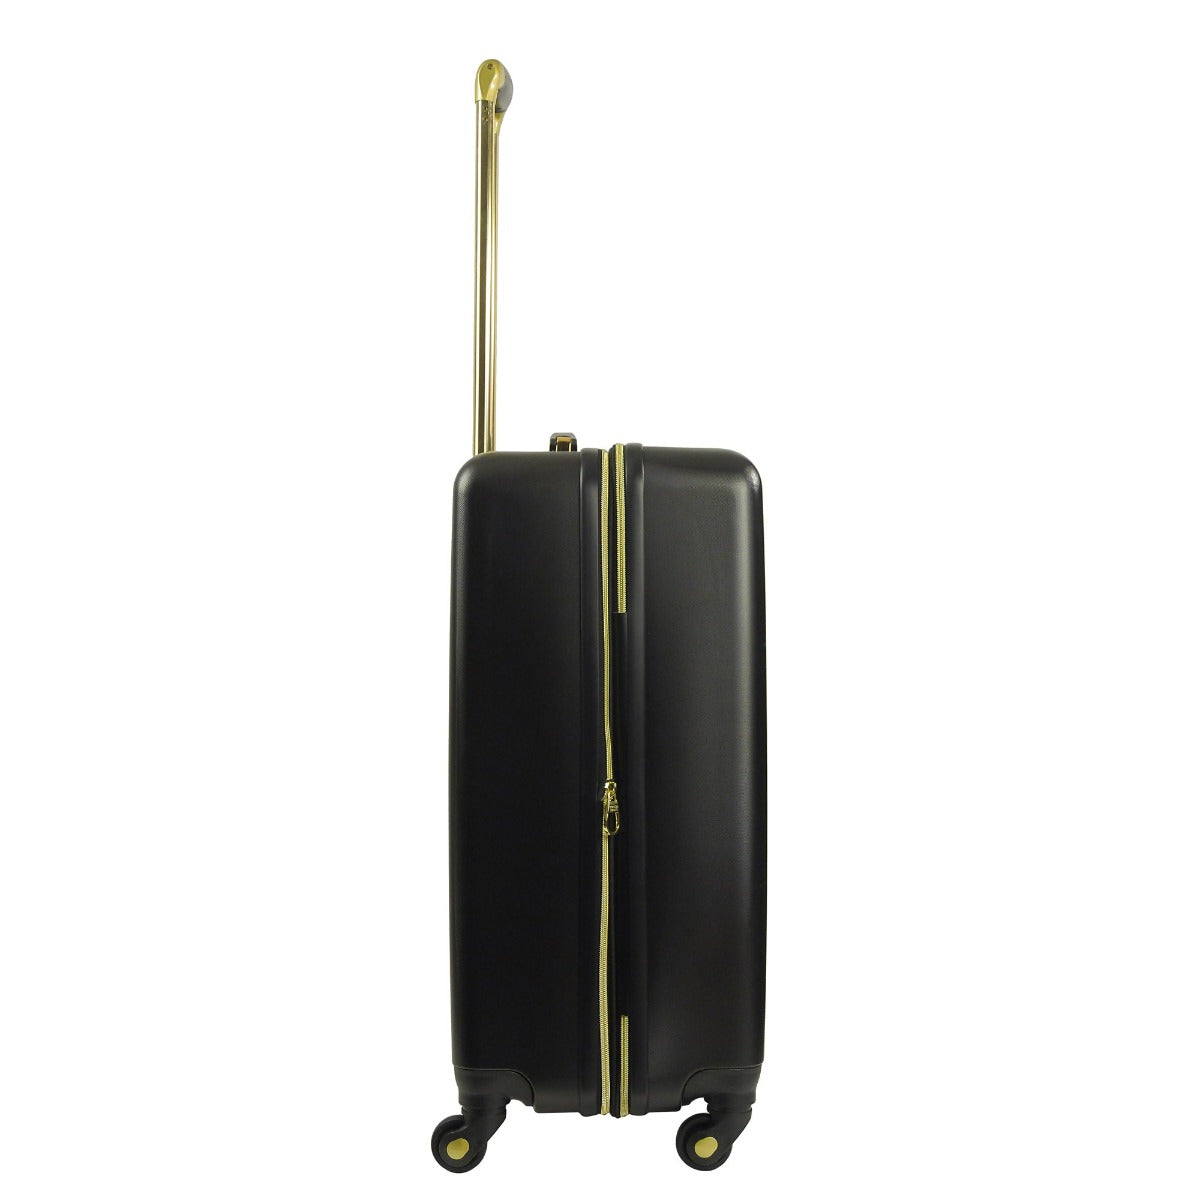 Christian Siriano Addie 25" hardside spinner suitcase checked luggage black - dependable suitcases for travel